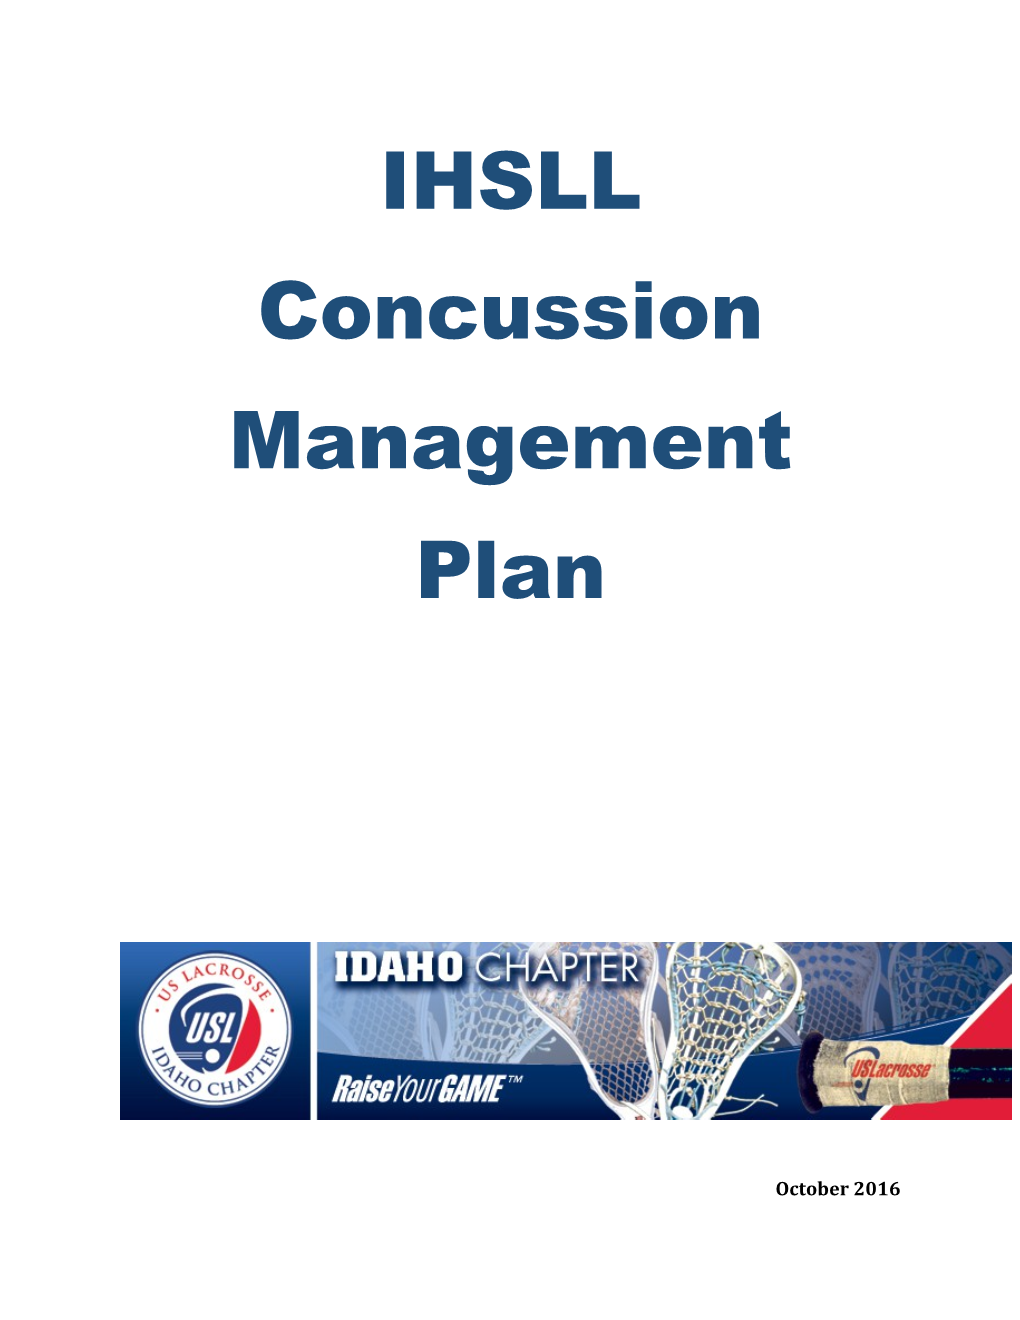 IHSLL Concussion Management Plan